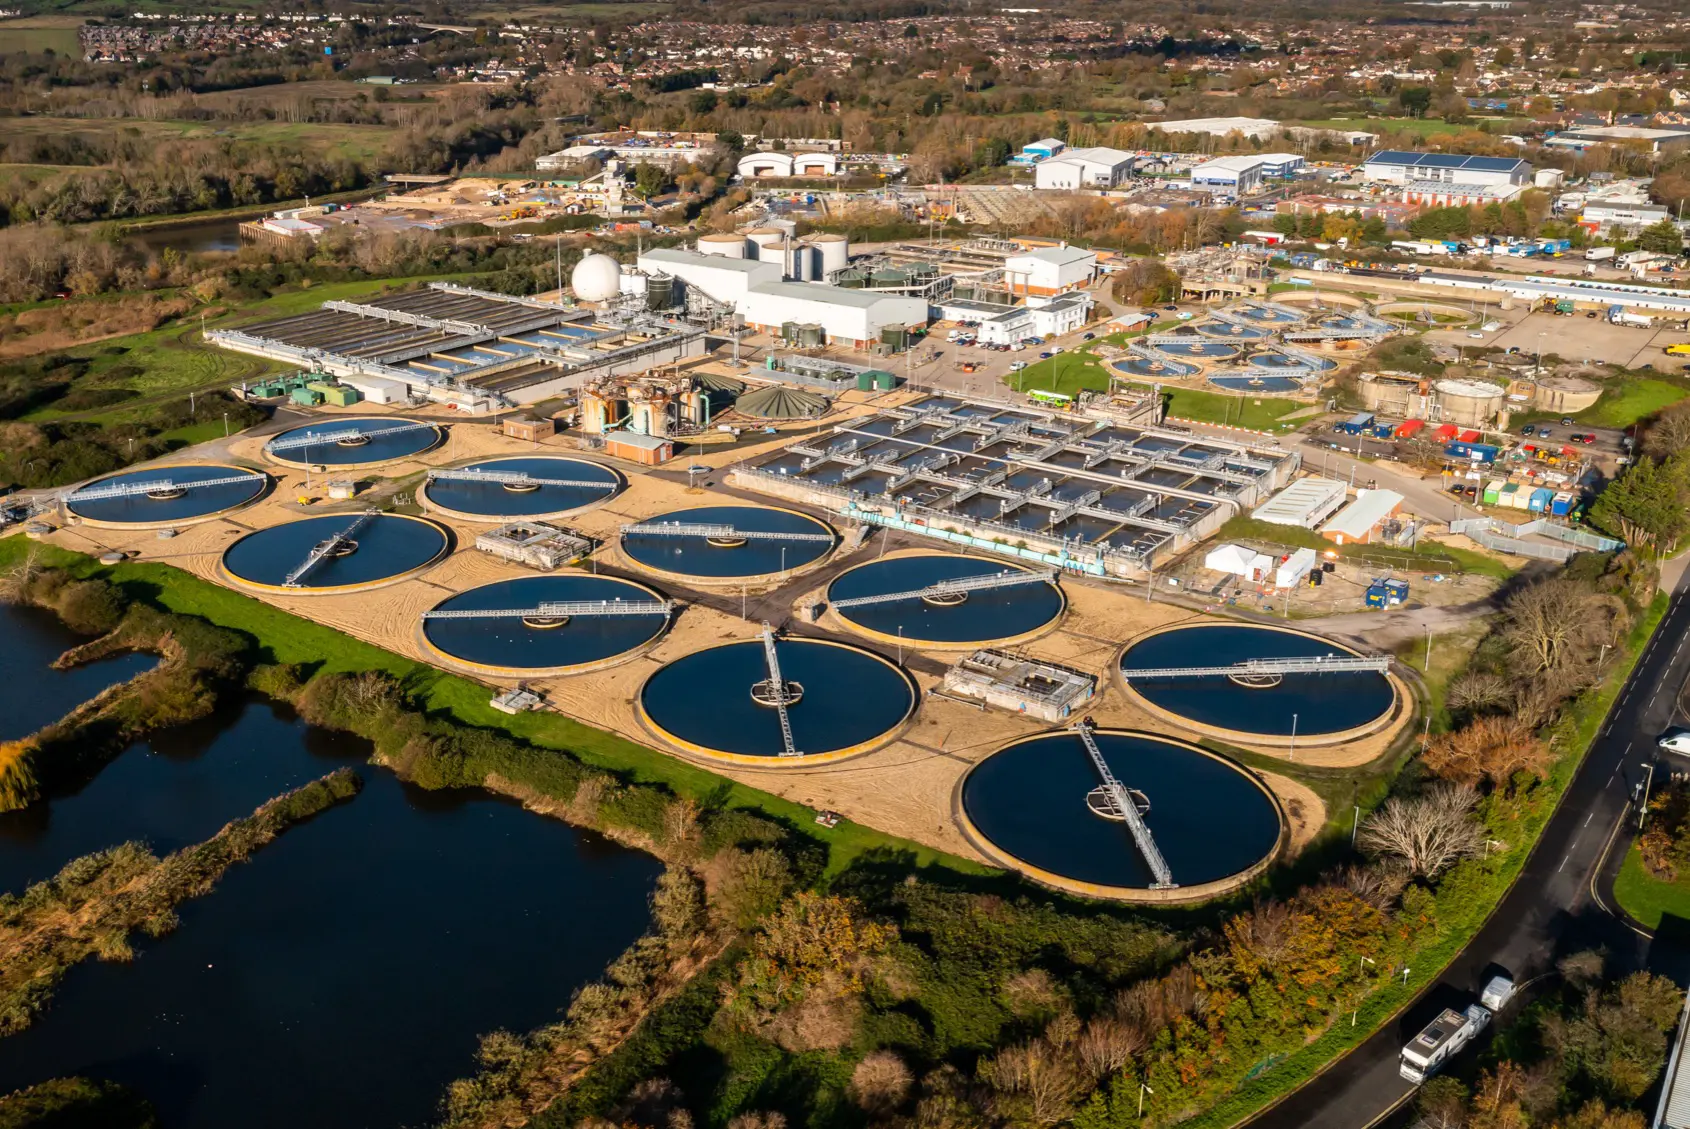 An aerial view of the Budds Farm Wastewater Treatment Works